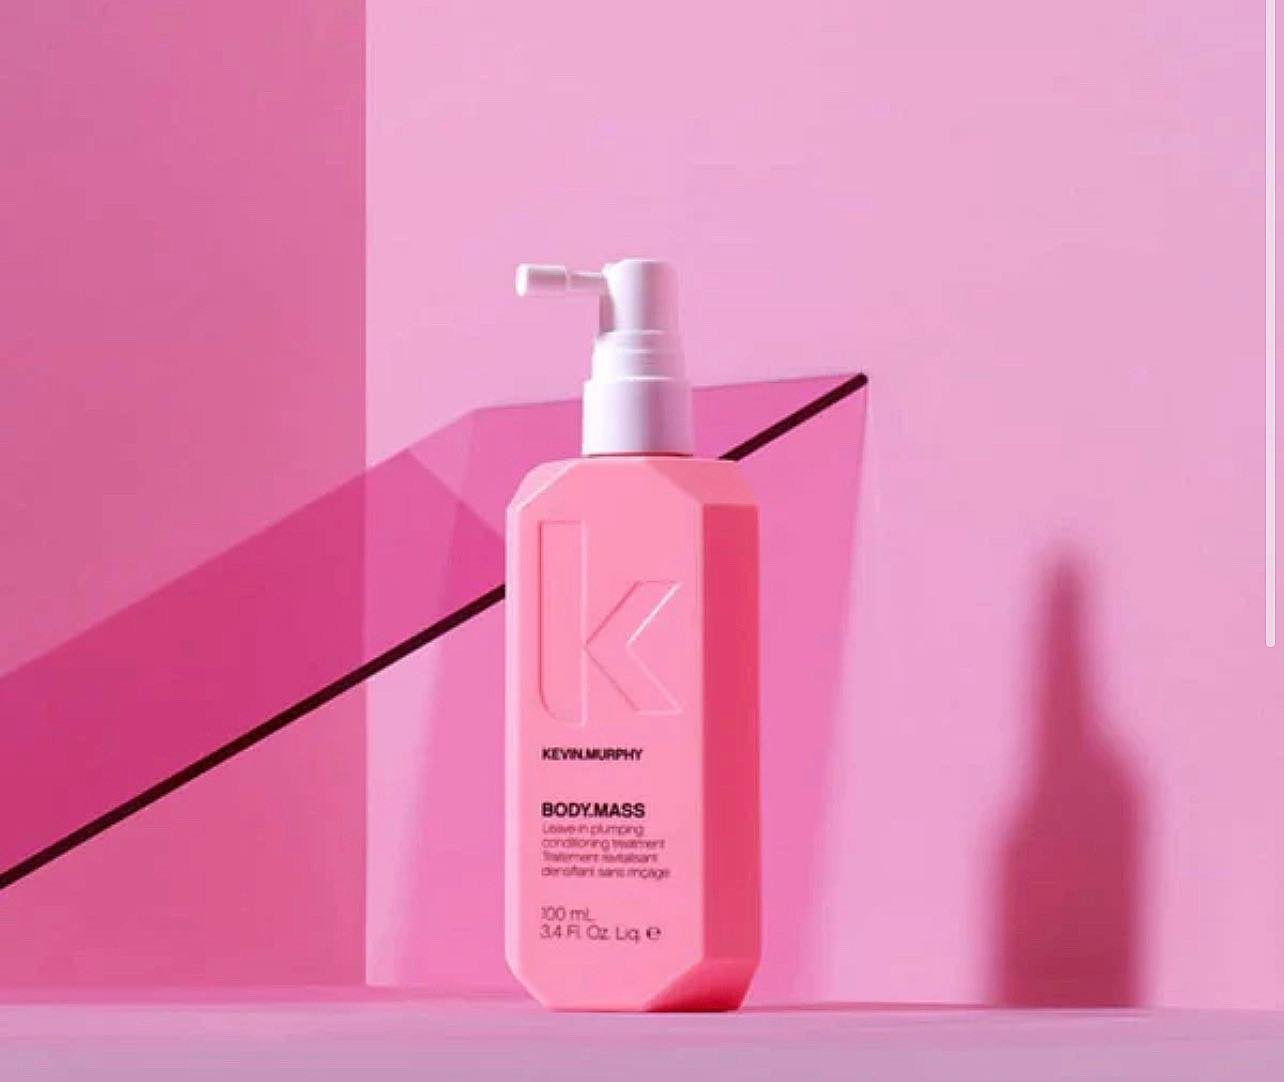 ✨BODY.MASS ✨

Level up your hair game while making a difference with KEVIN.MURPHY&rsquo;s BODY.MASS! 

Helps strengthen the hair, while imparting a fullness and thickness that gives you beautiful body and bounce. Richly formulated with Oleanolic Acid